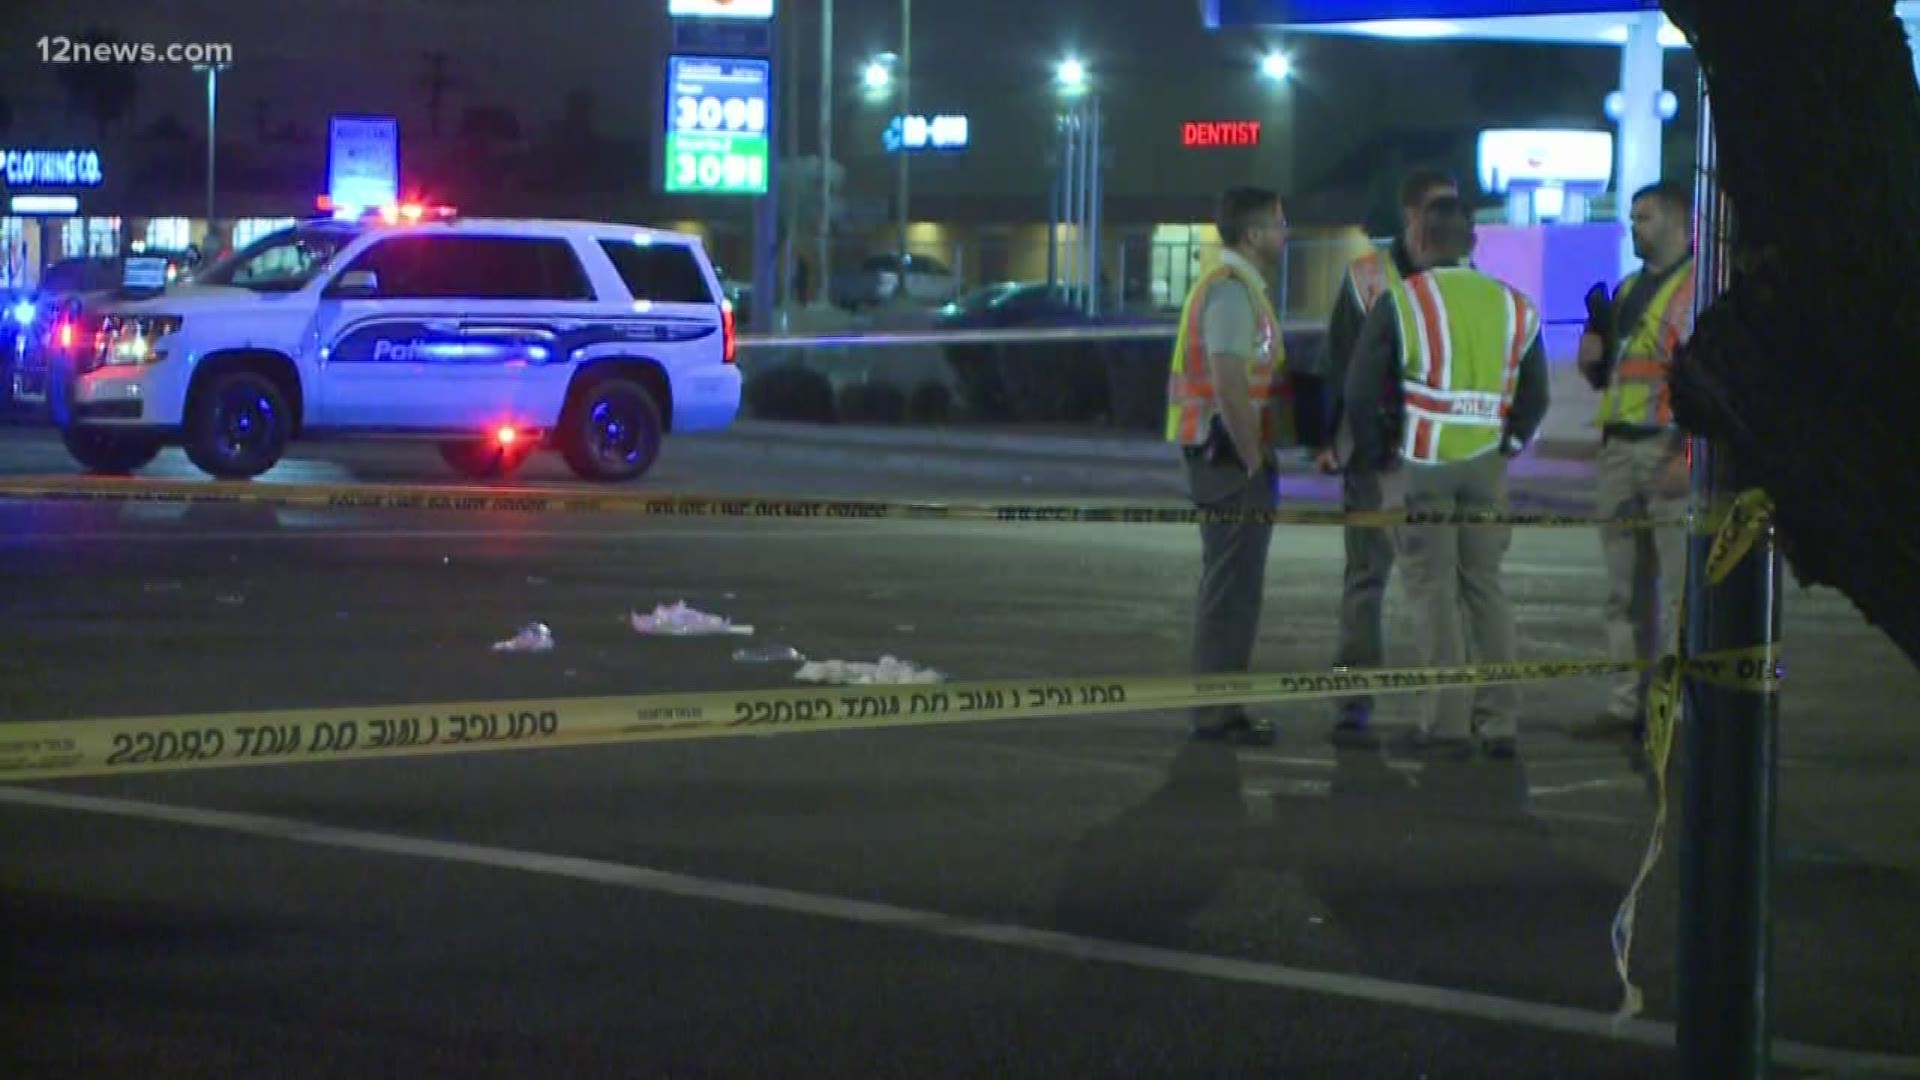 The hit-and-run at 43rd Avenue and Thomas Road  that left a pedestrian in critical condition is the latest in a series of crashes involving pedestrians in Phoenix.